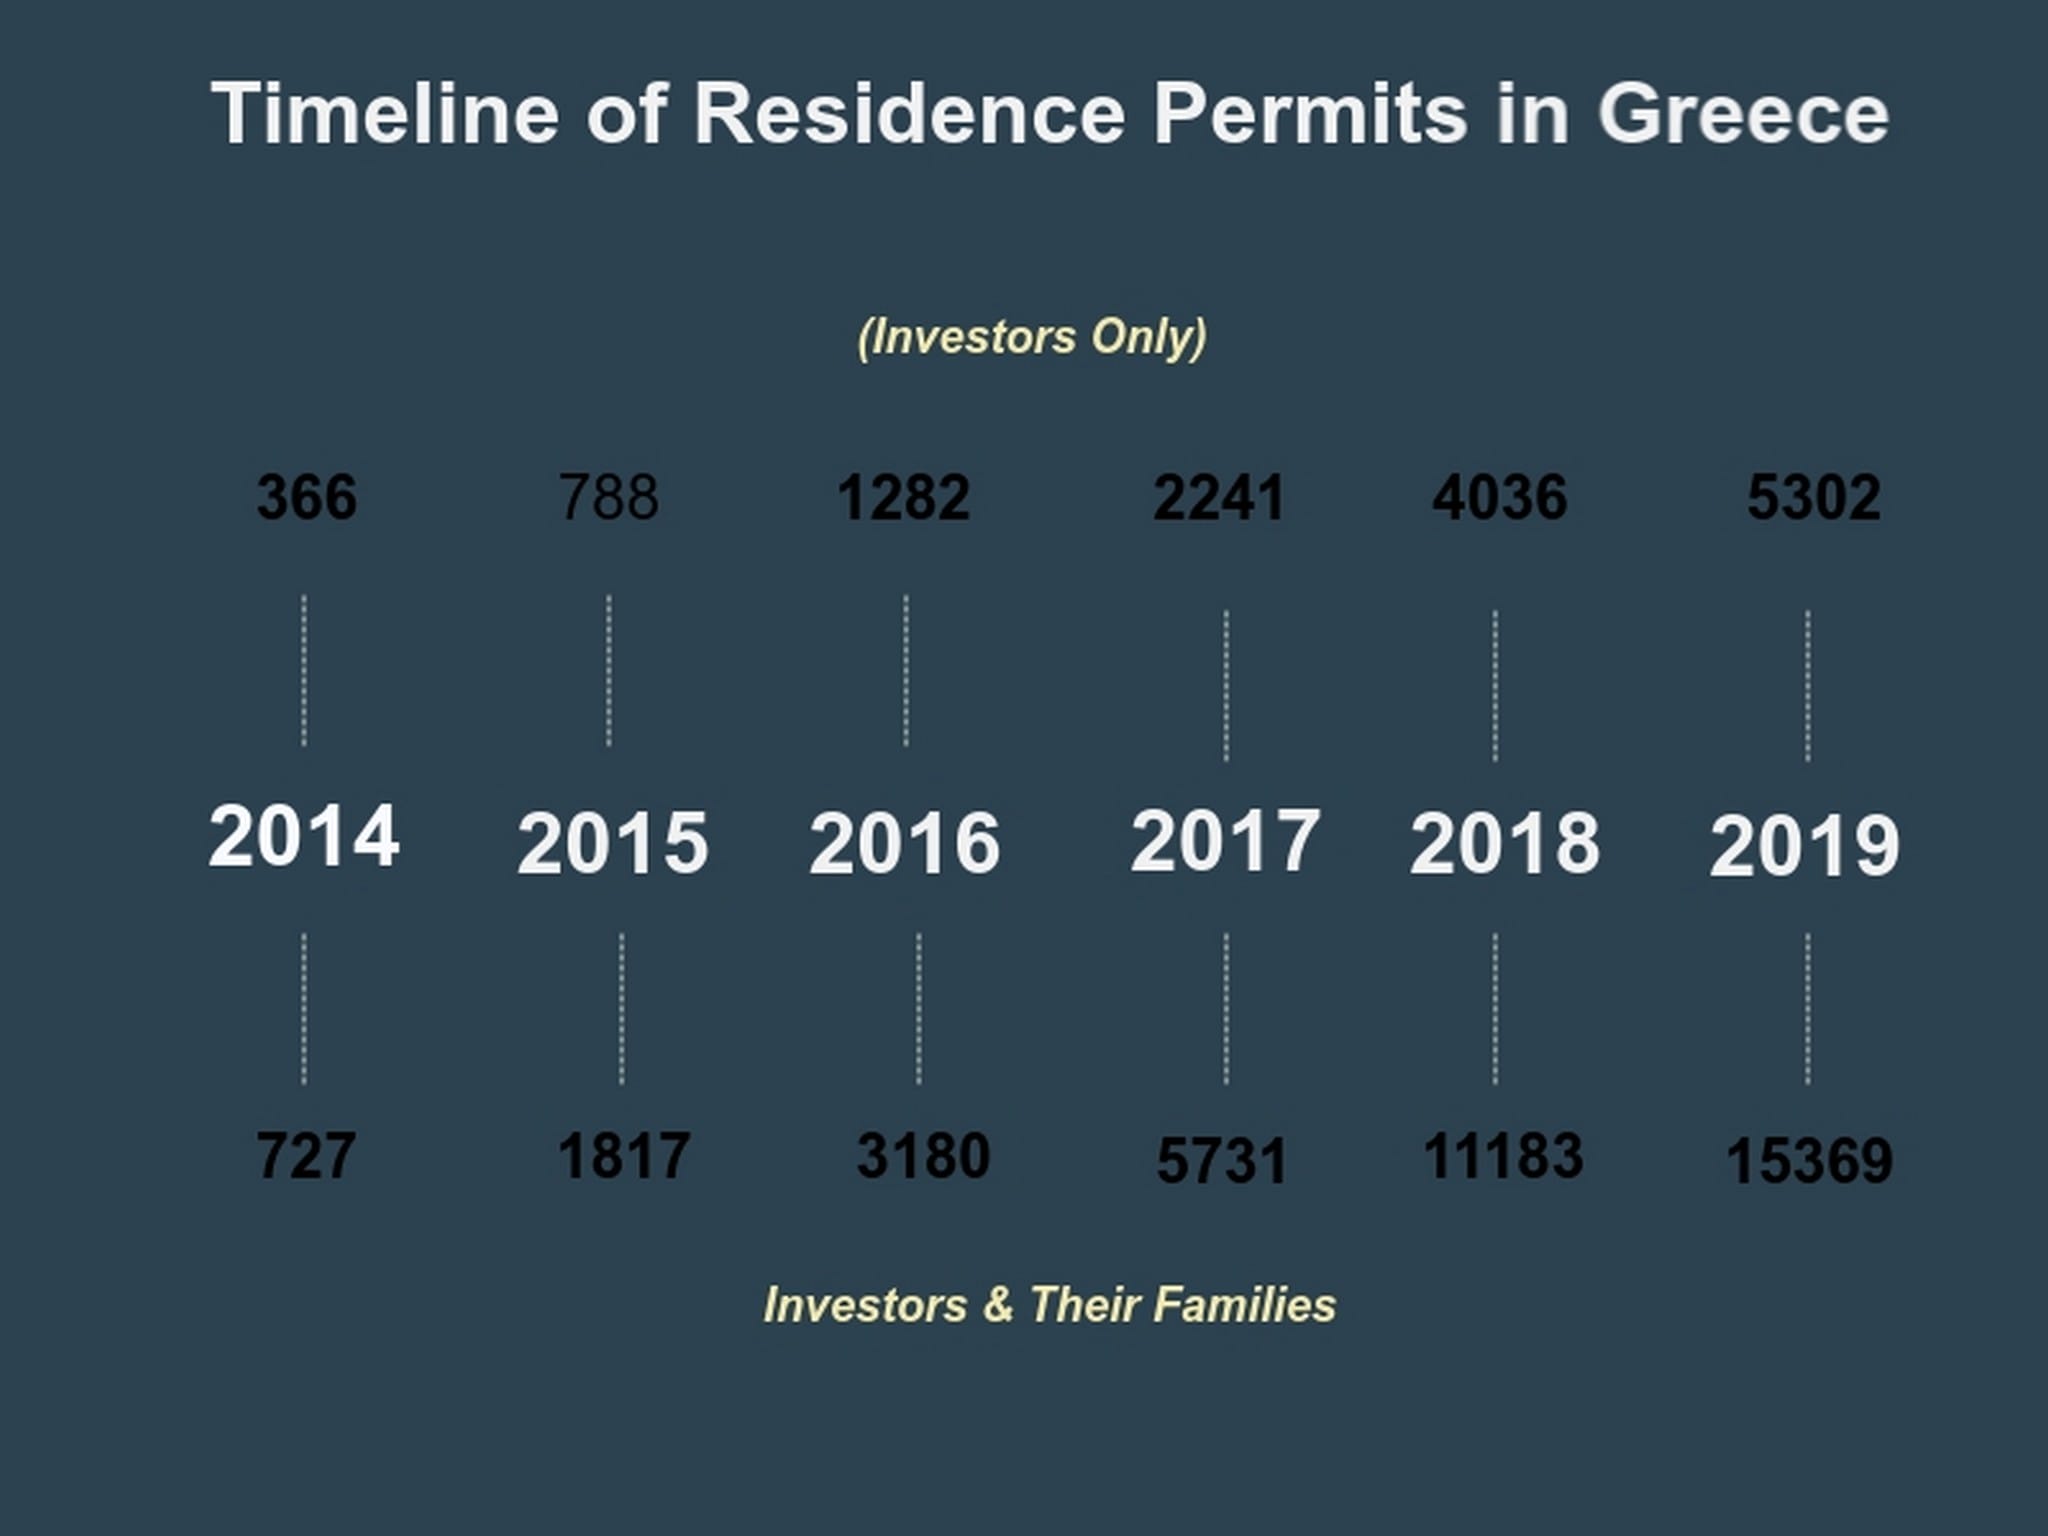 Timeline of Residence Permits in Greece by Divine Property